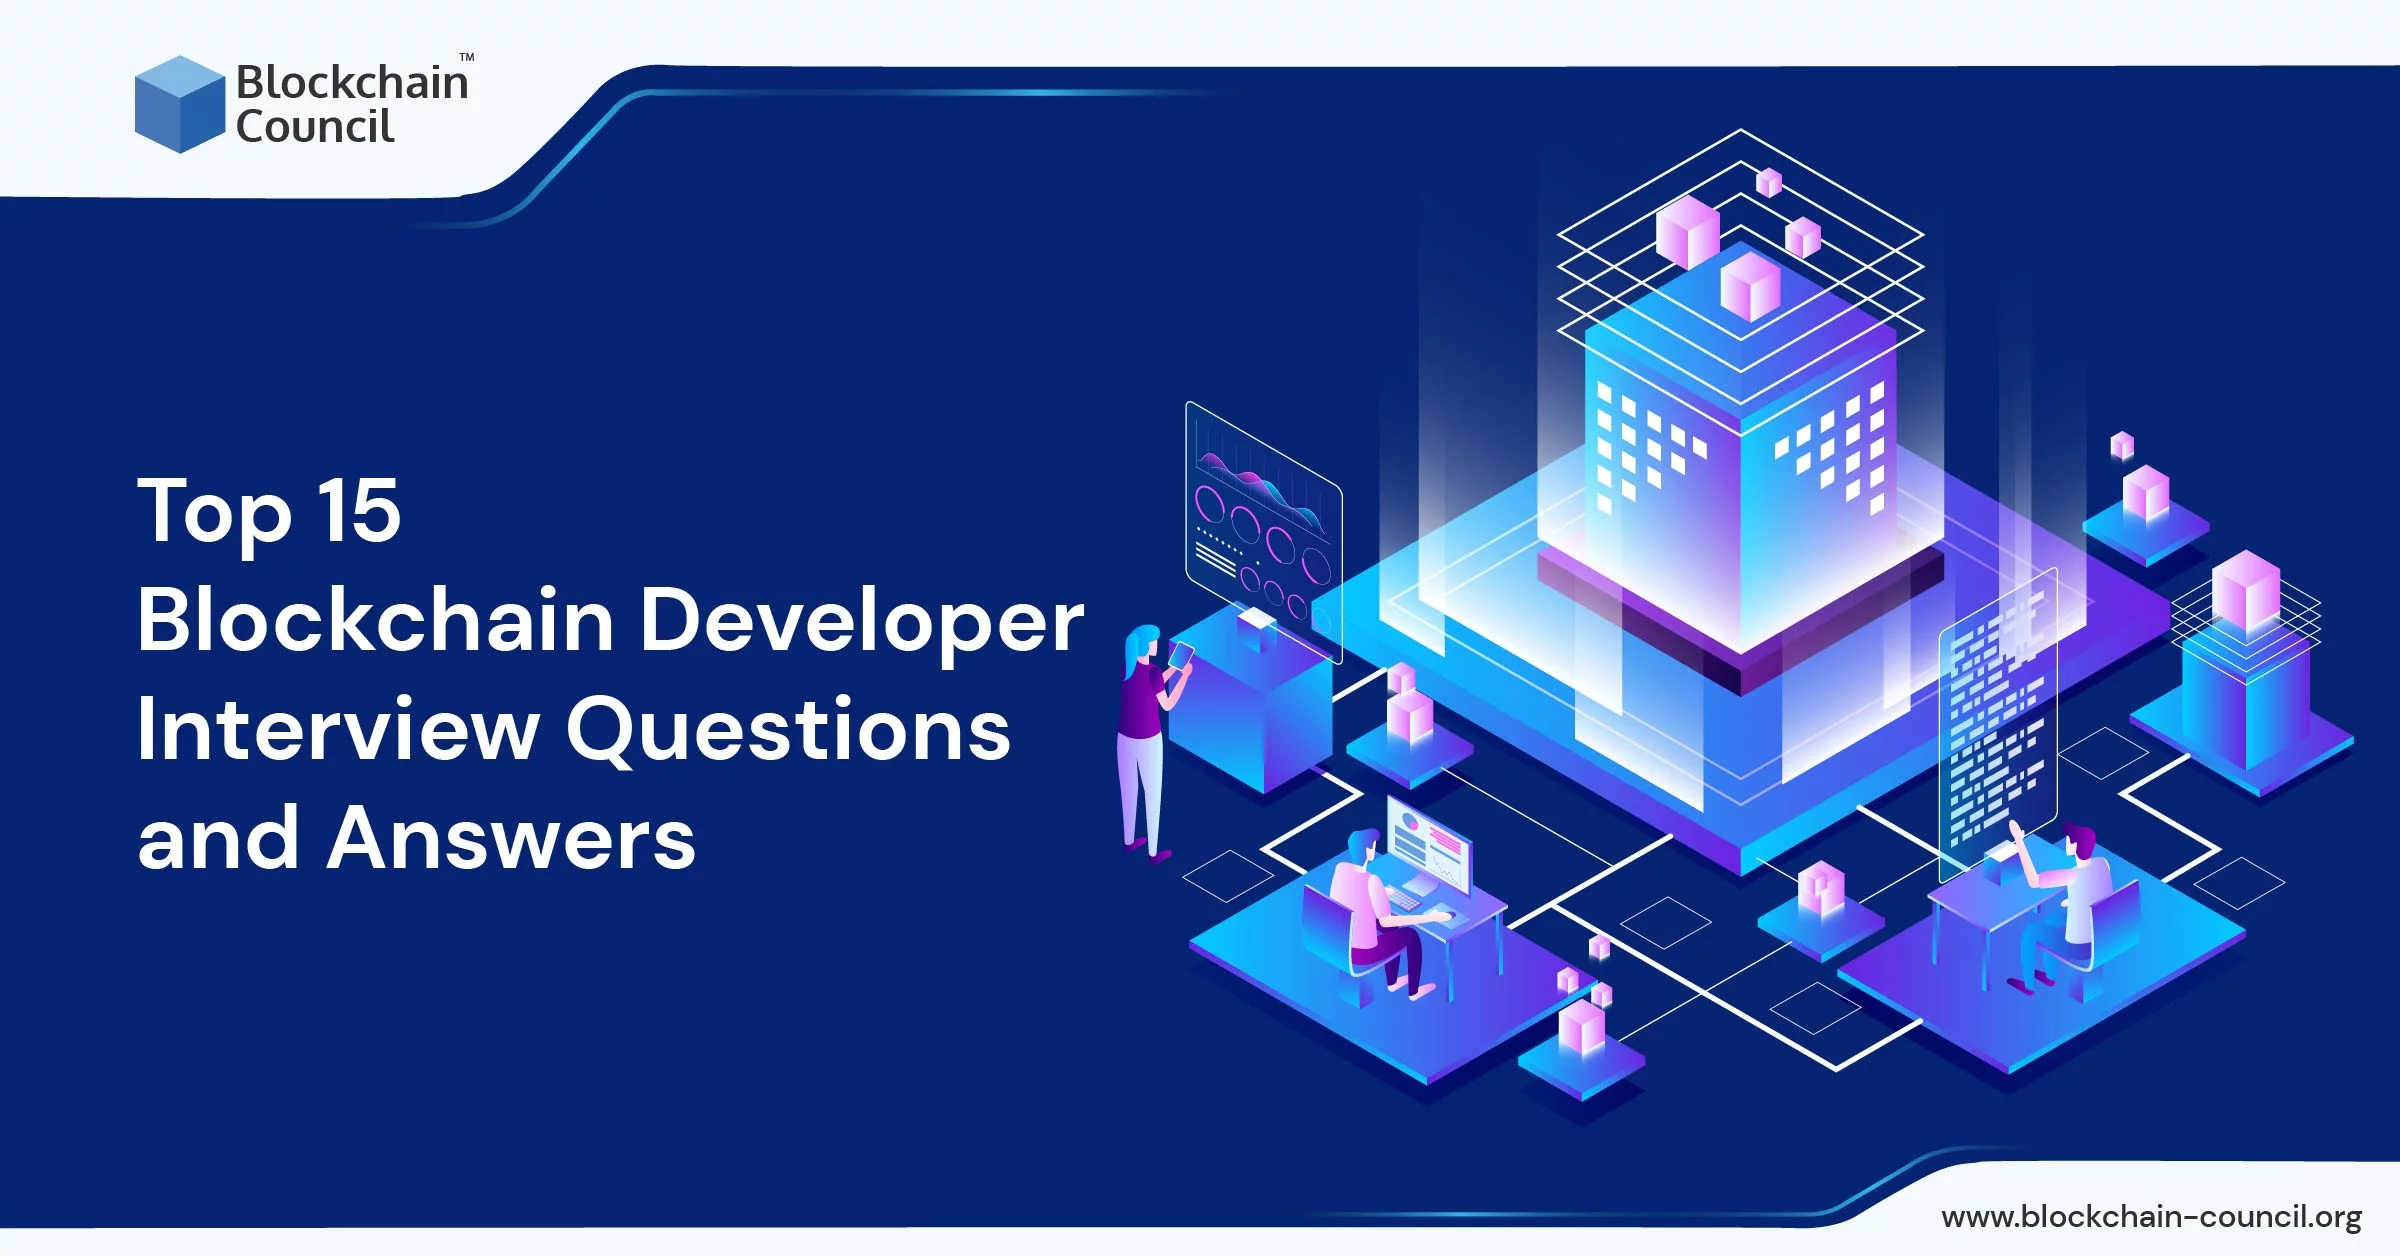 Top 15 Blockchain Developer Interview Questions and Answer